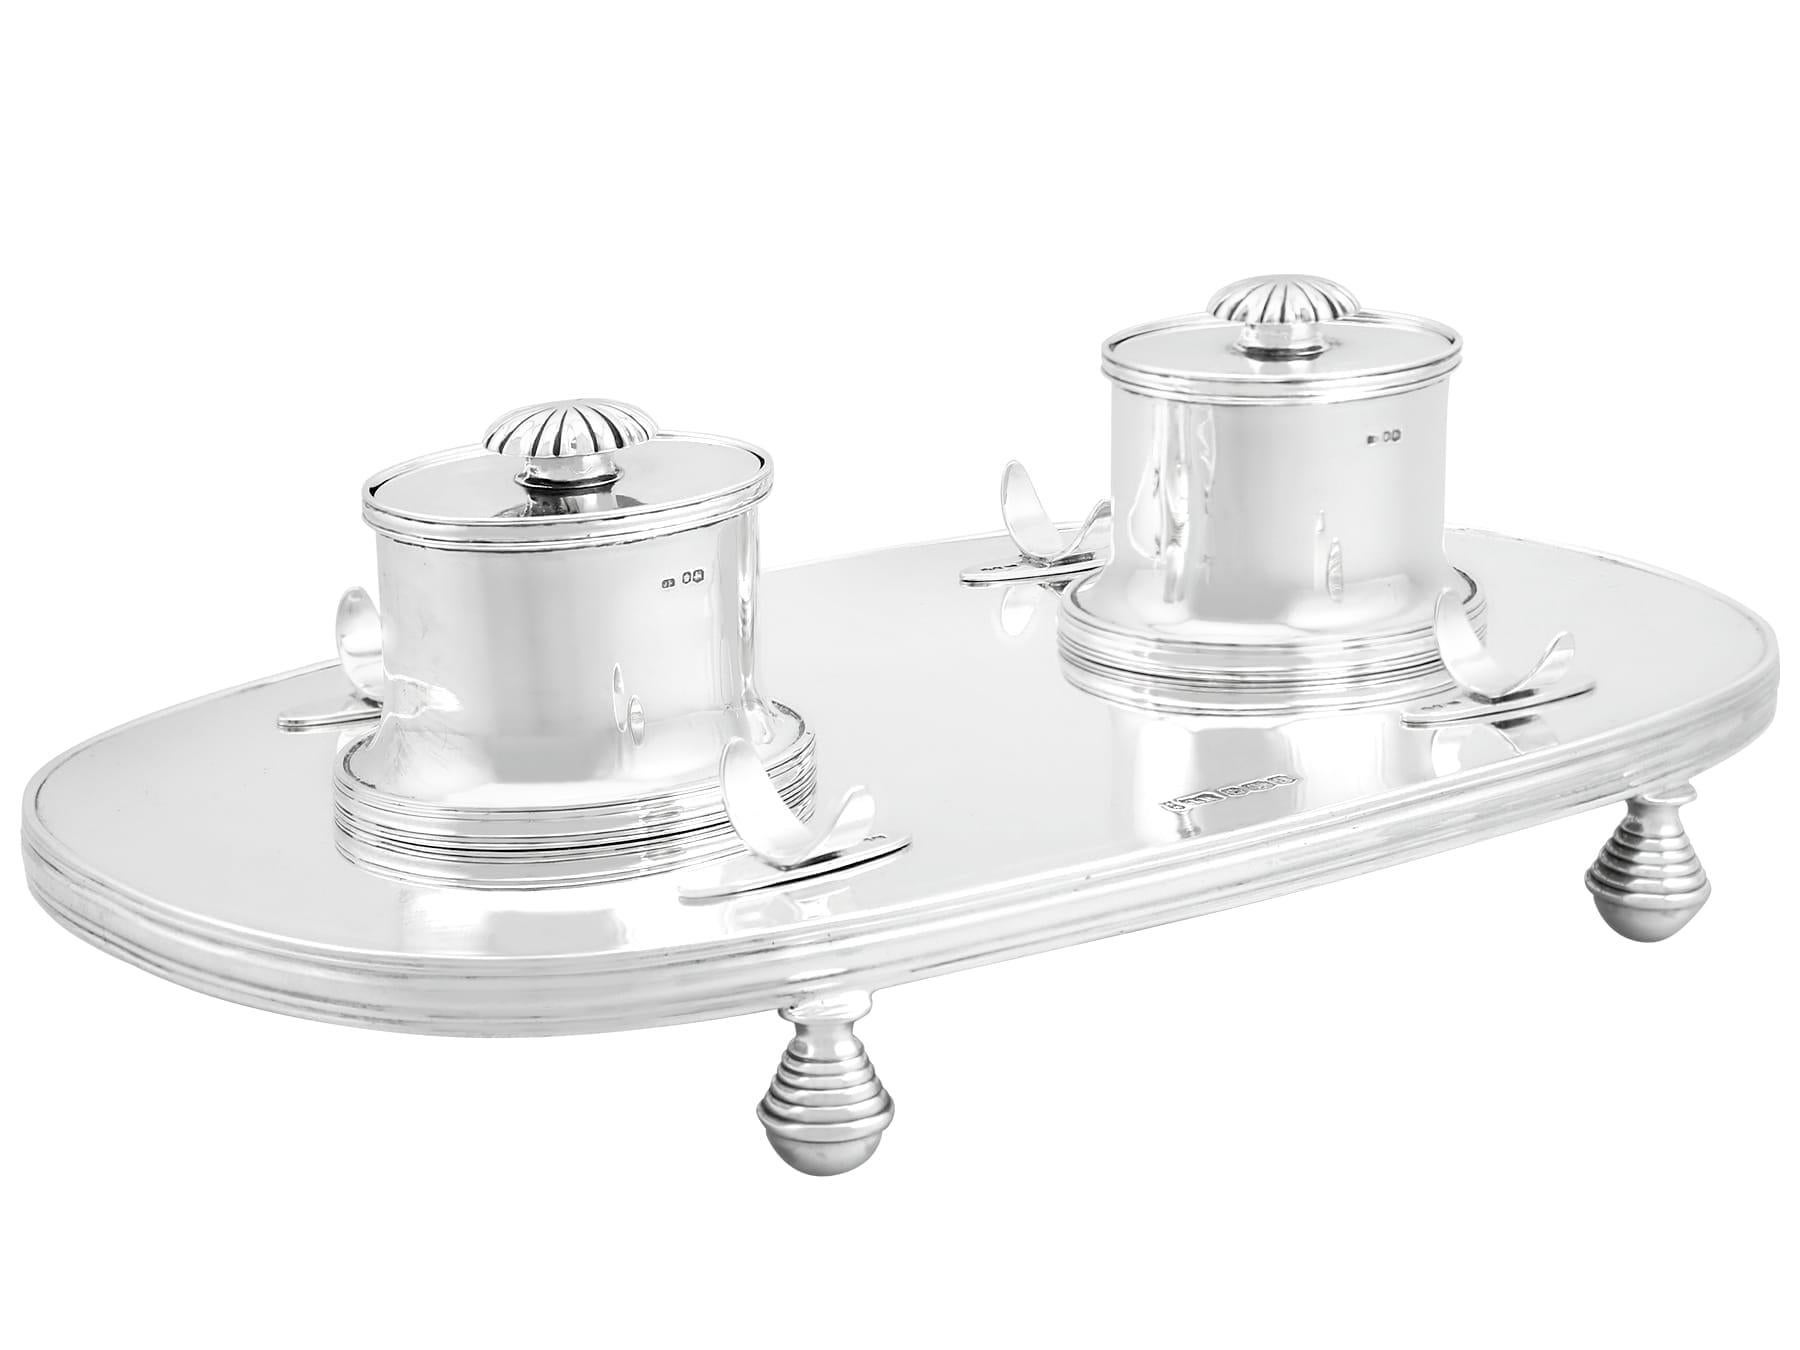 An exceptional, fine and impressive antique George V English sterling silver inkstand; an addition to our ornamental office silverware collection

This exceptional, fine and impressive antique George V sterling silver inkstand has a plain oval